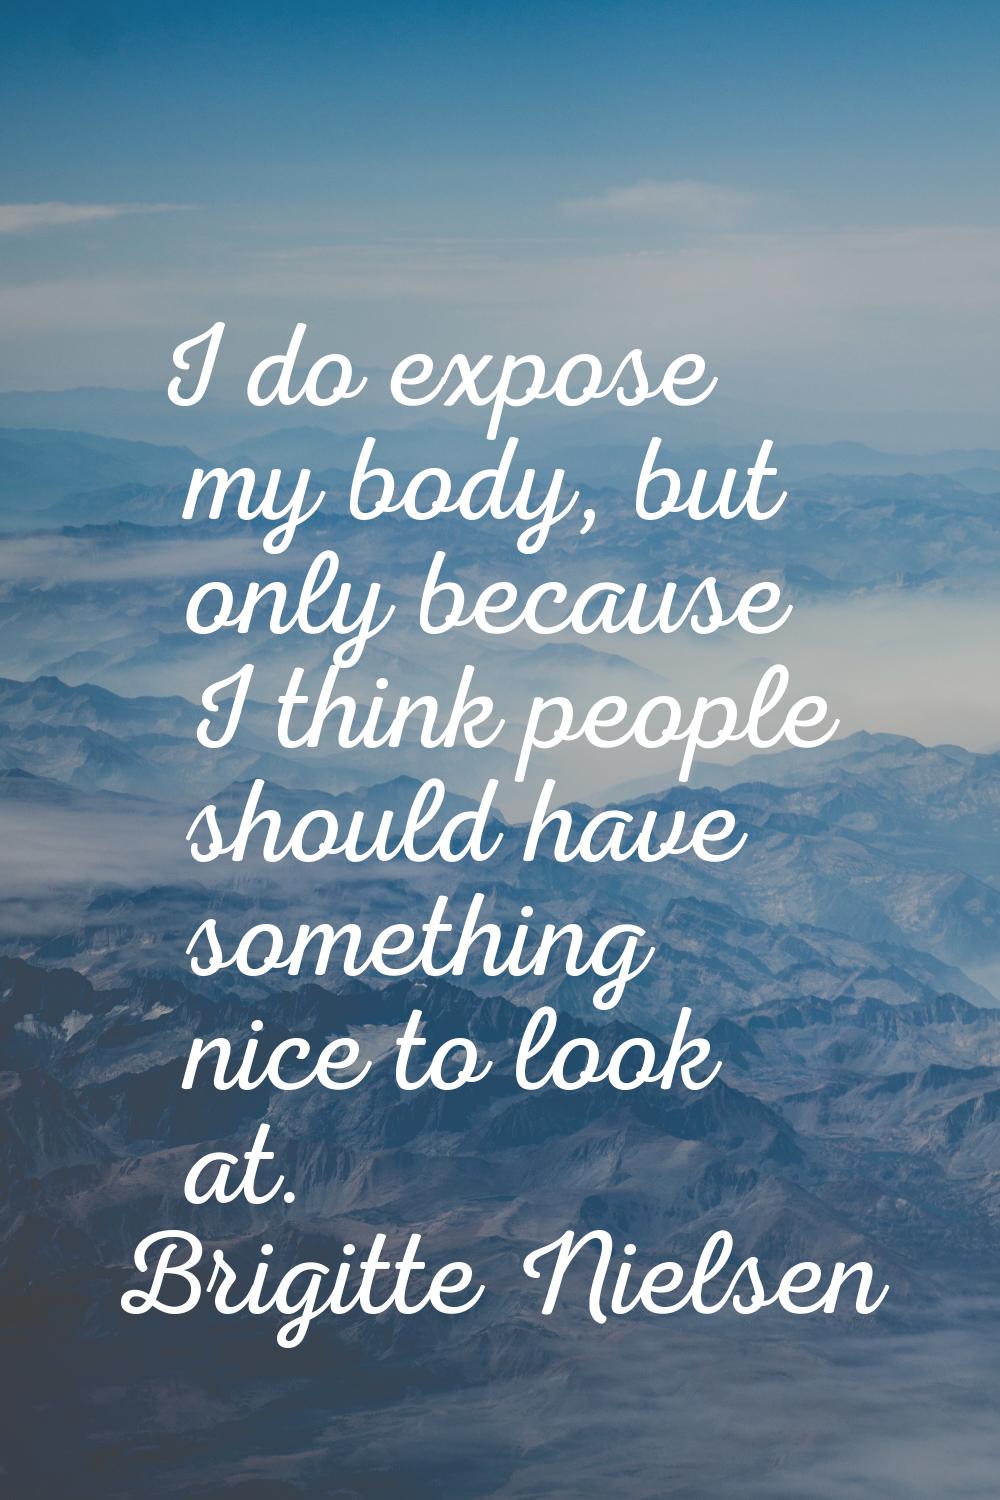 I do expose my body, but only because I think people should have something nice to look at.